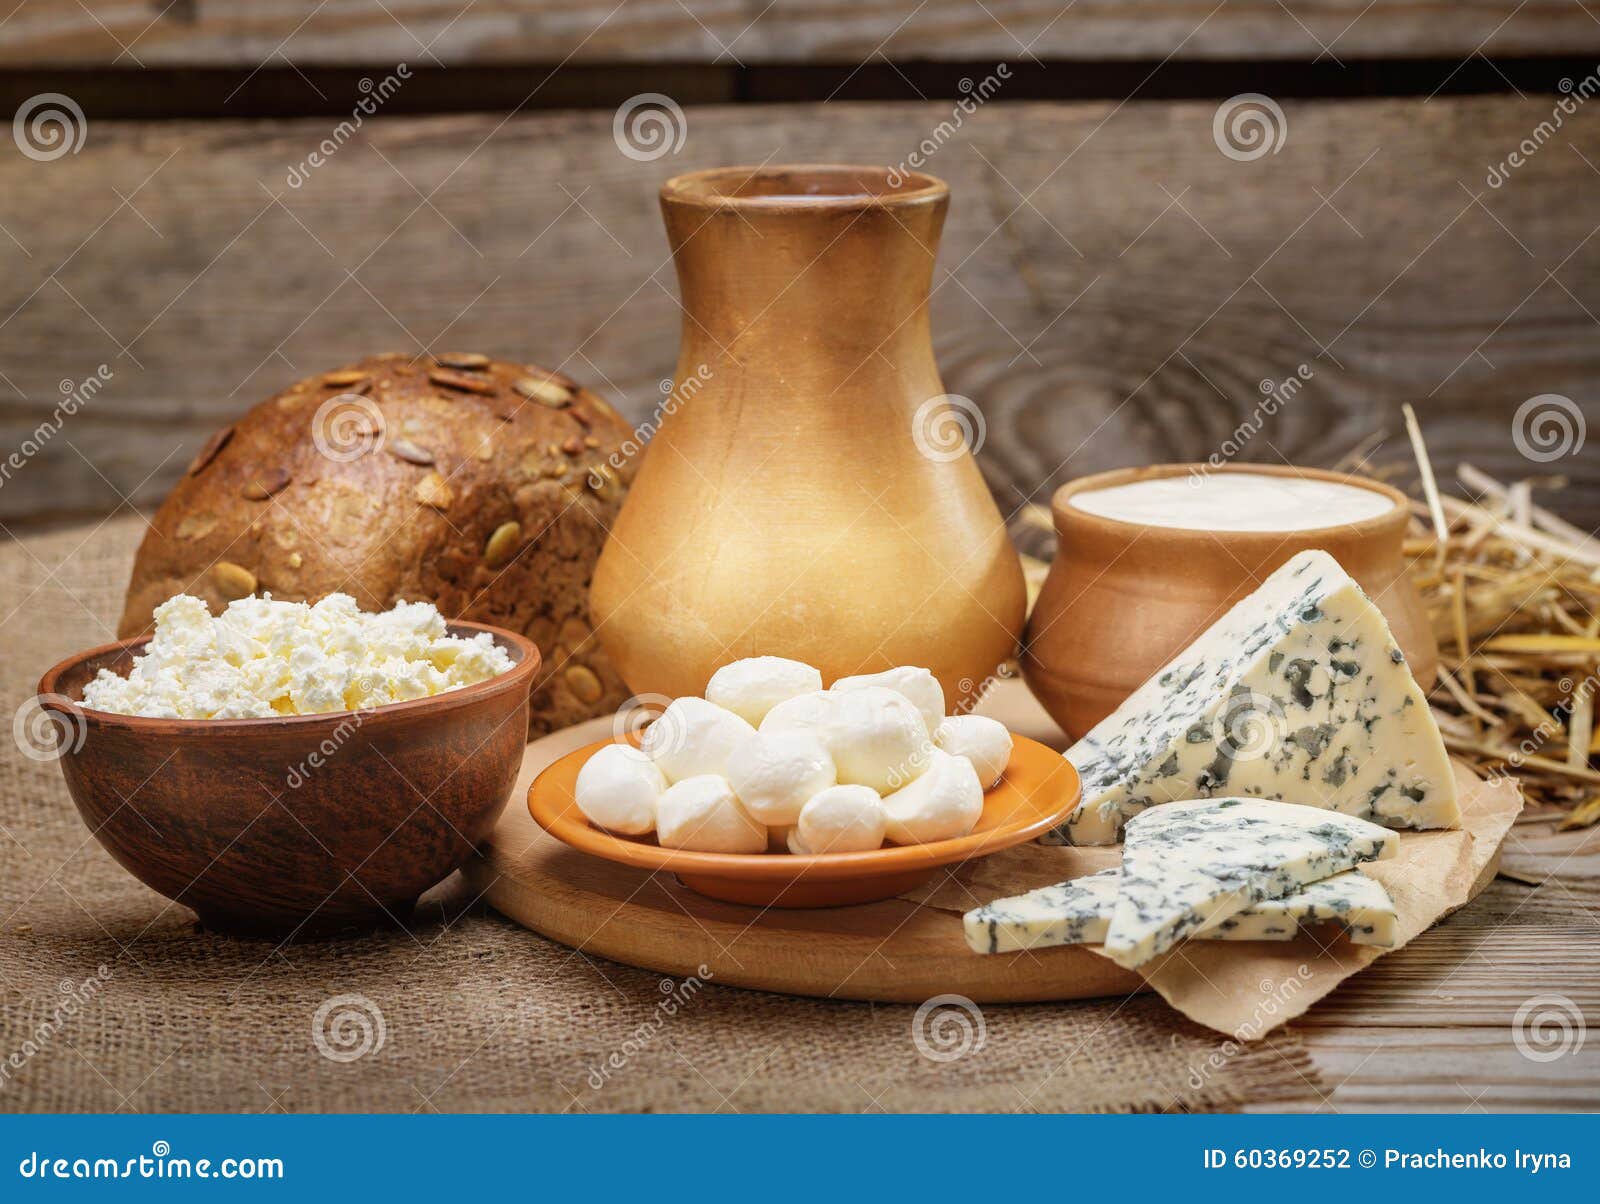 Rustic Natural Dairy Products Stock Photo Image Of Gourmet